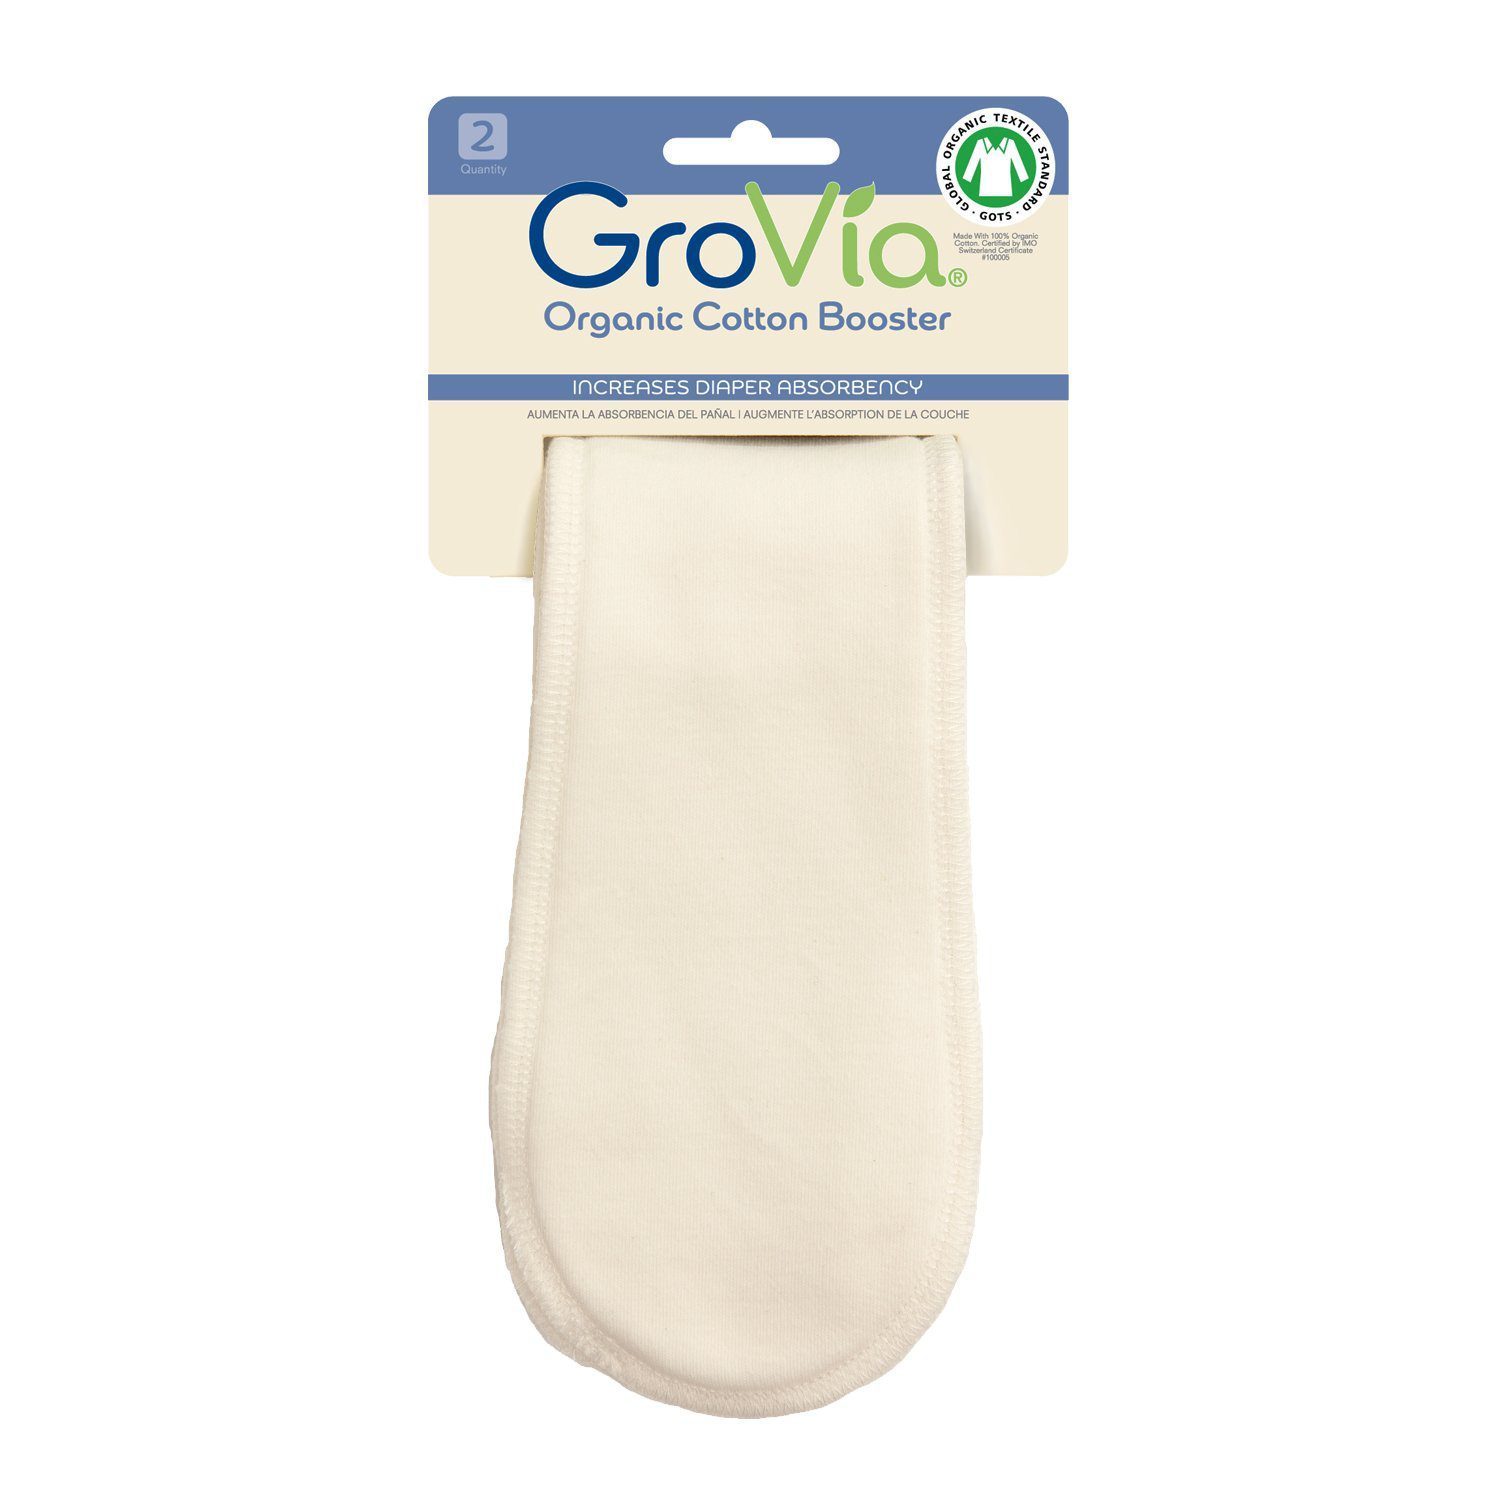 https://thediapershop.ca/storage/2020/04/absorbency-organic-cotton-booster-1356573376539_2000x.jpg